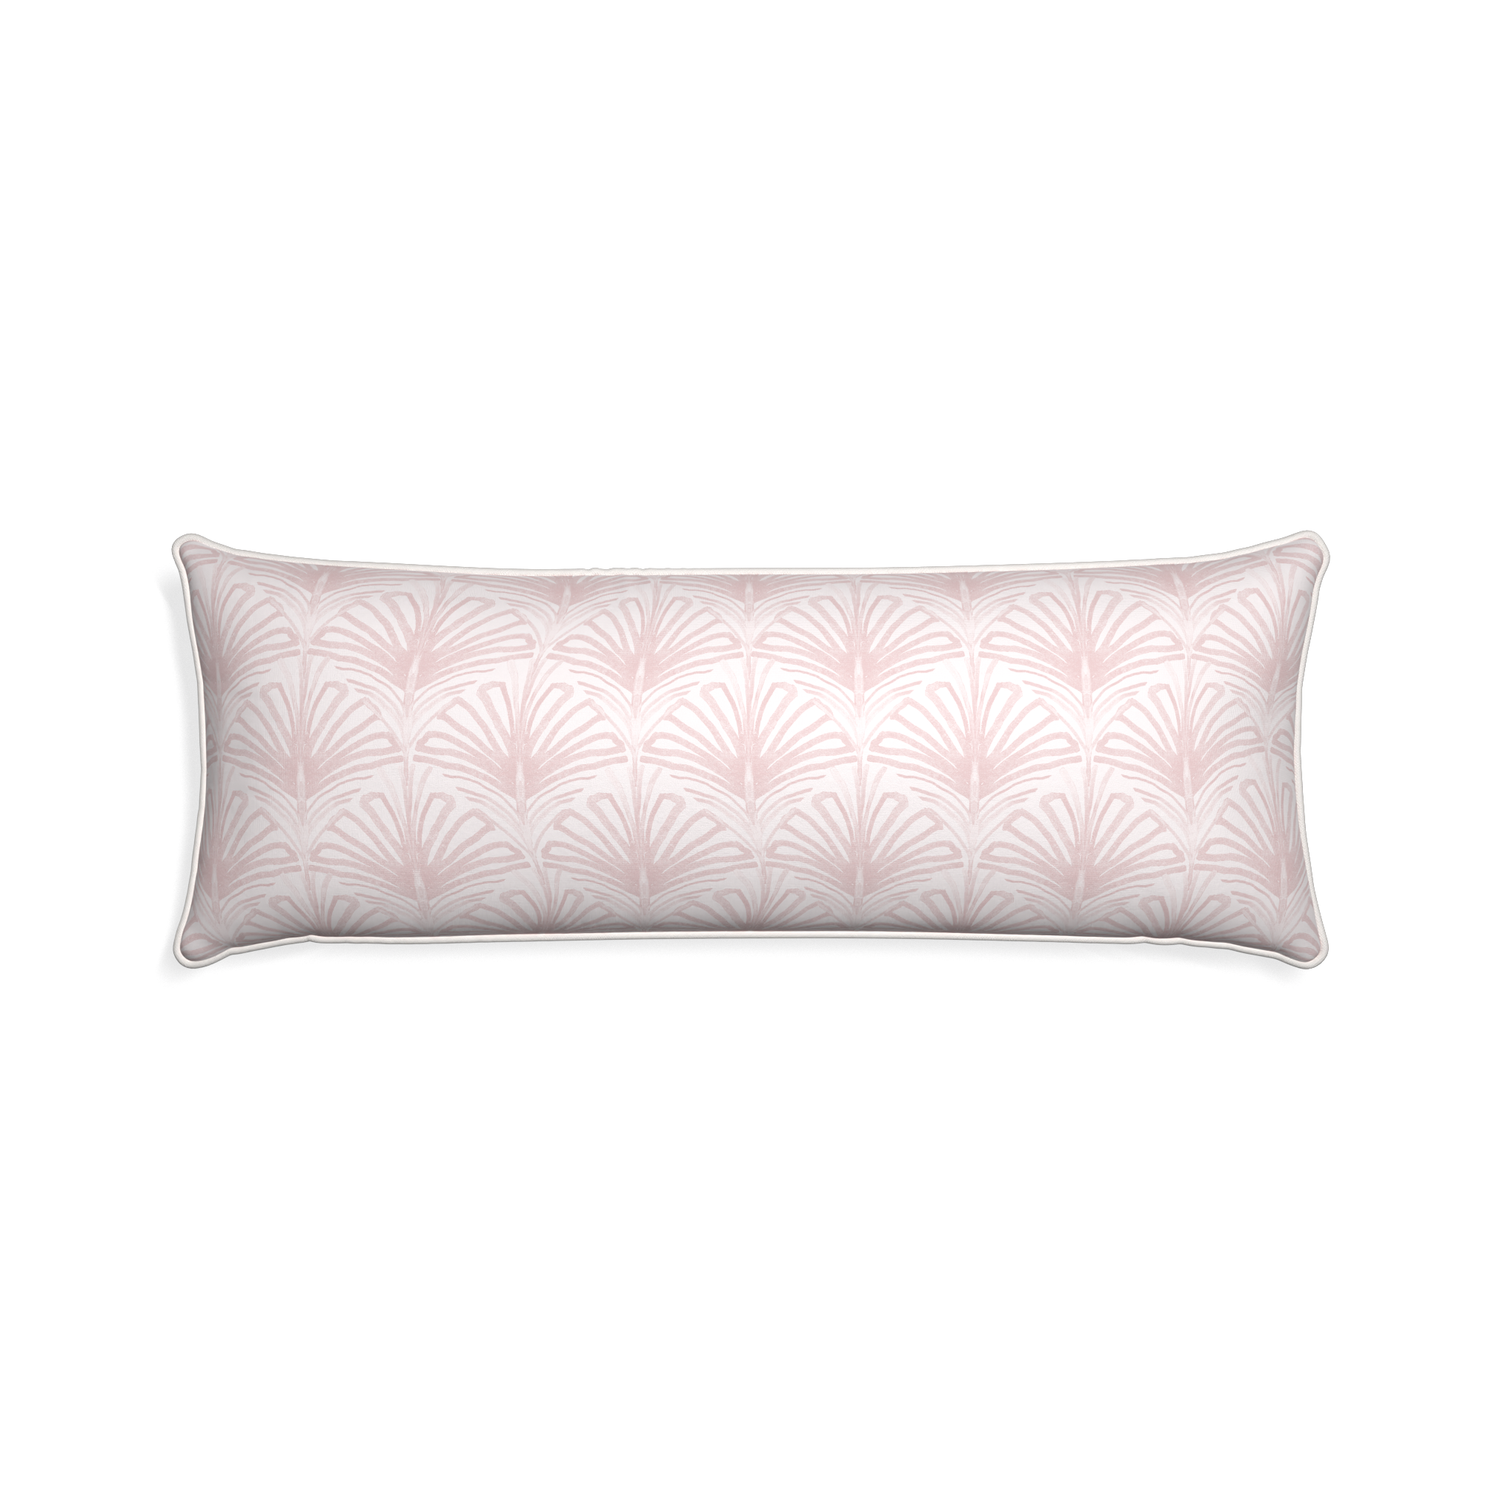 Xl-lumbar suzy rose custom pillow with snow piping on white background